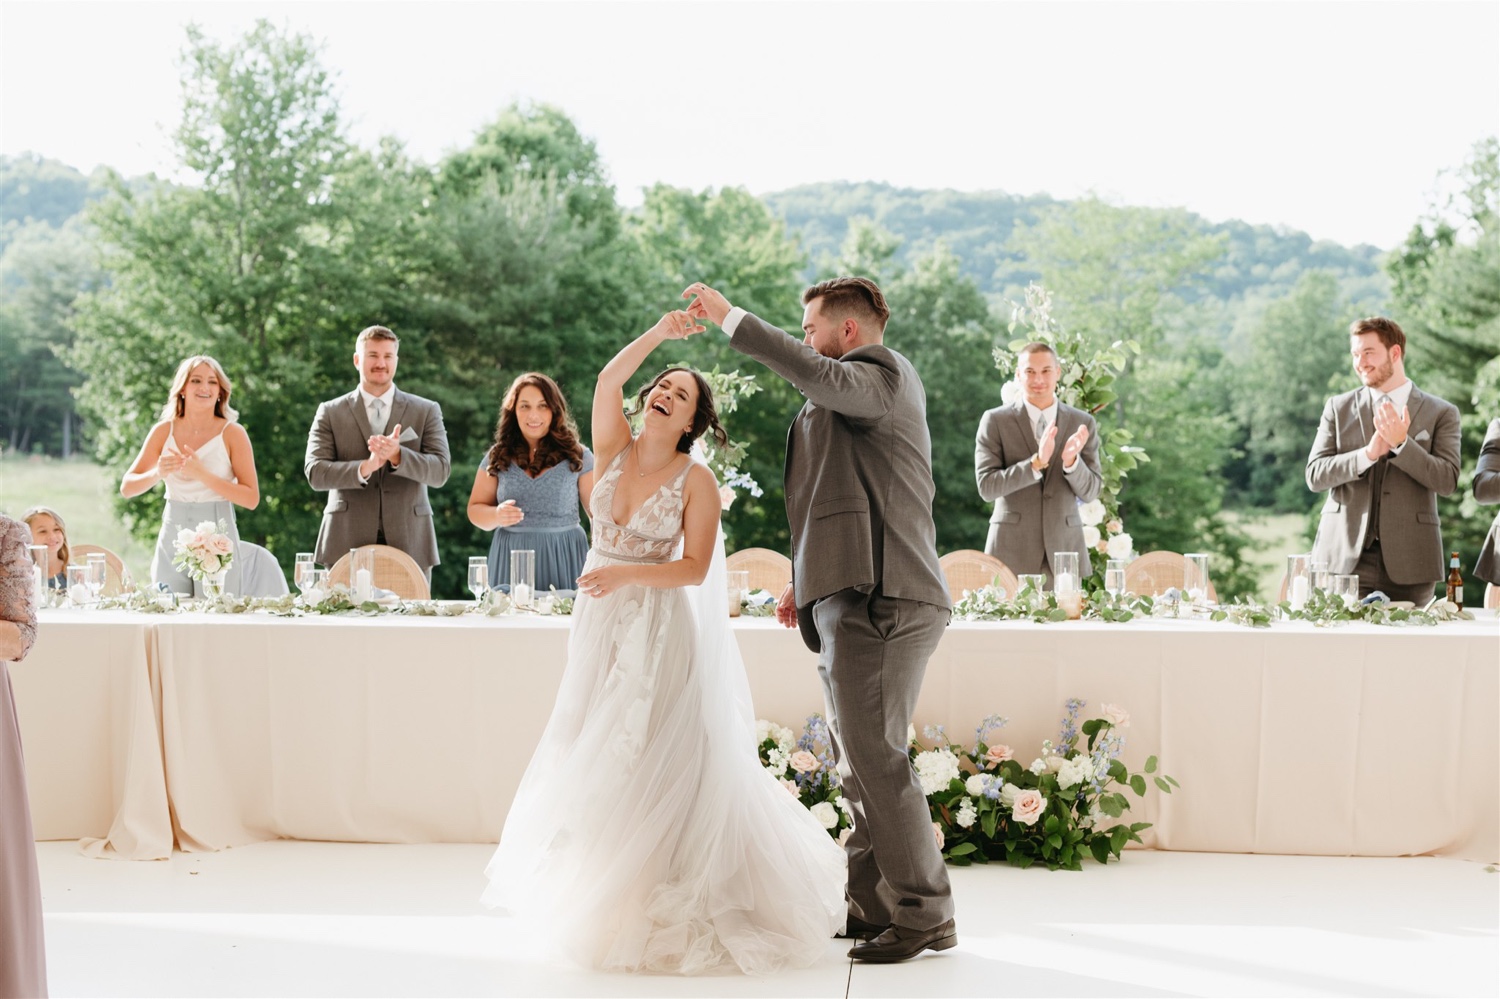 ivy rose barn bride and groom dancing smiling wedding party happy